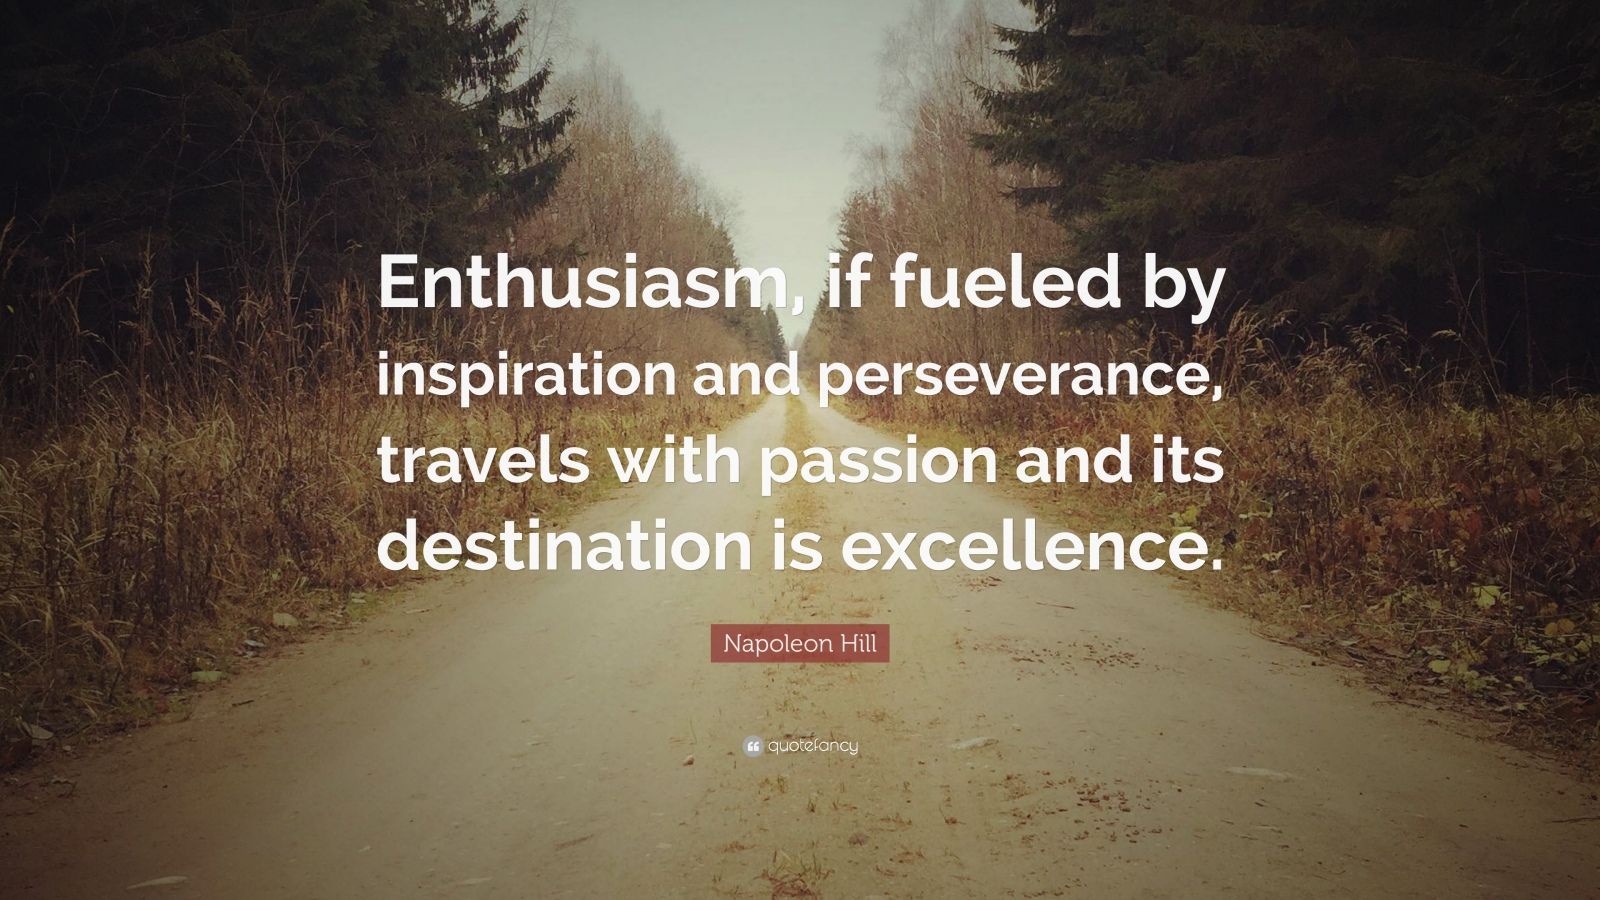 Napoleon Hill Quote: “Enthusiasm, if fueled by inspiration and